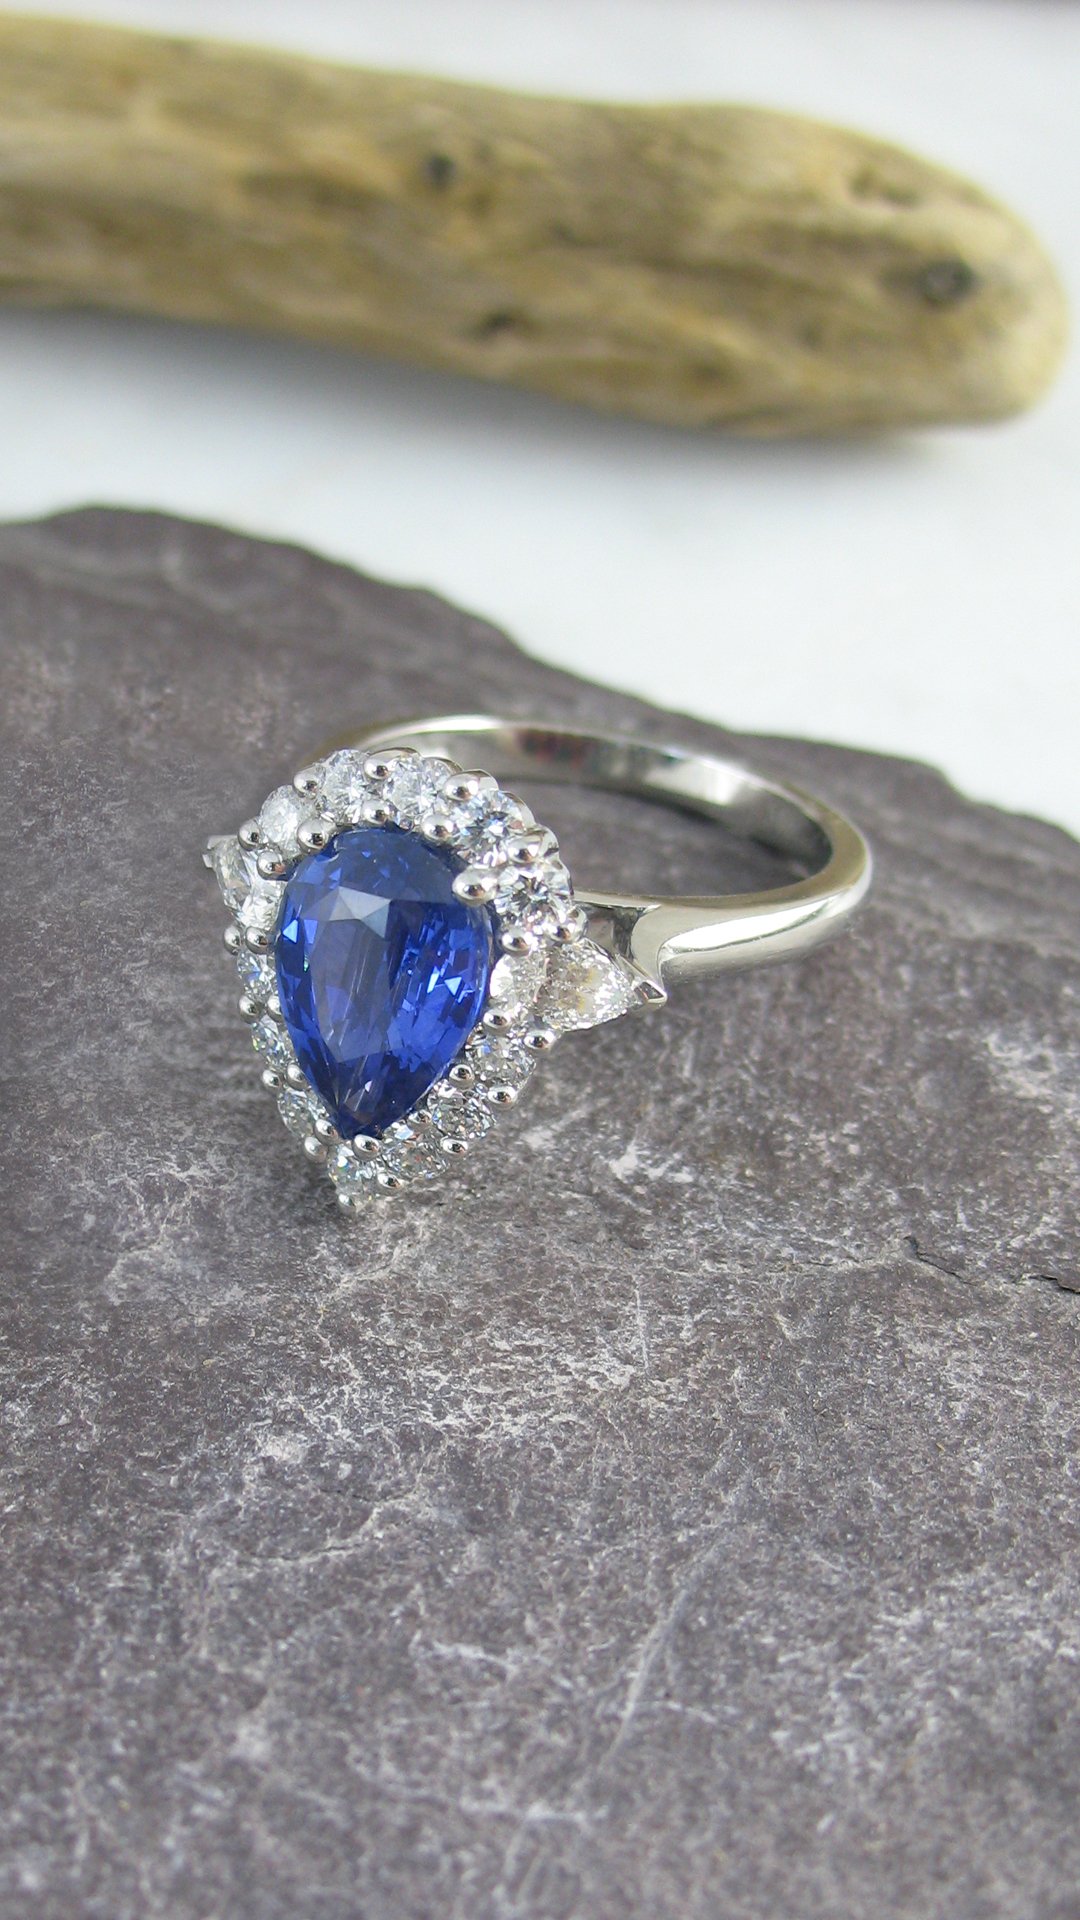 An exquisite pear-shaped sapphire halo ring